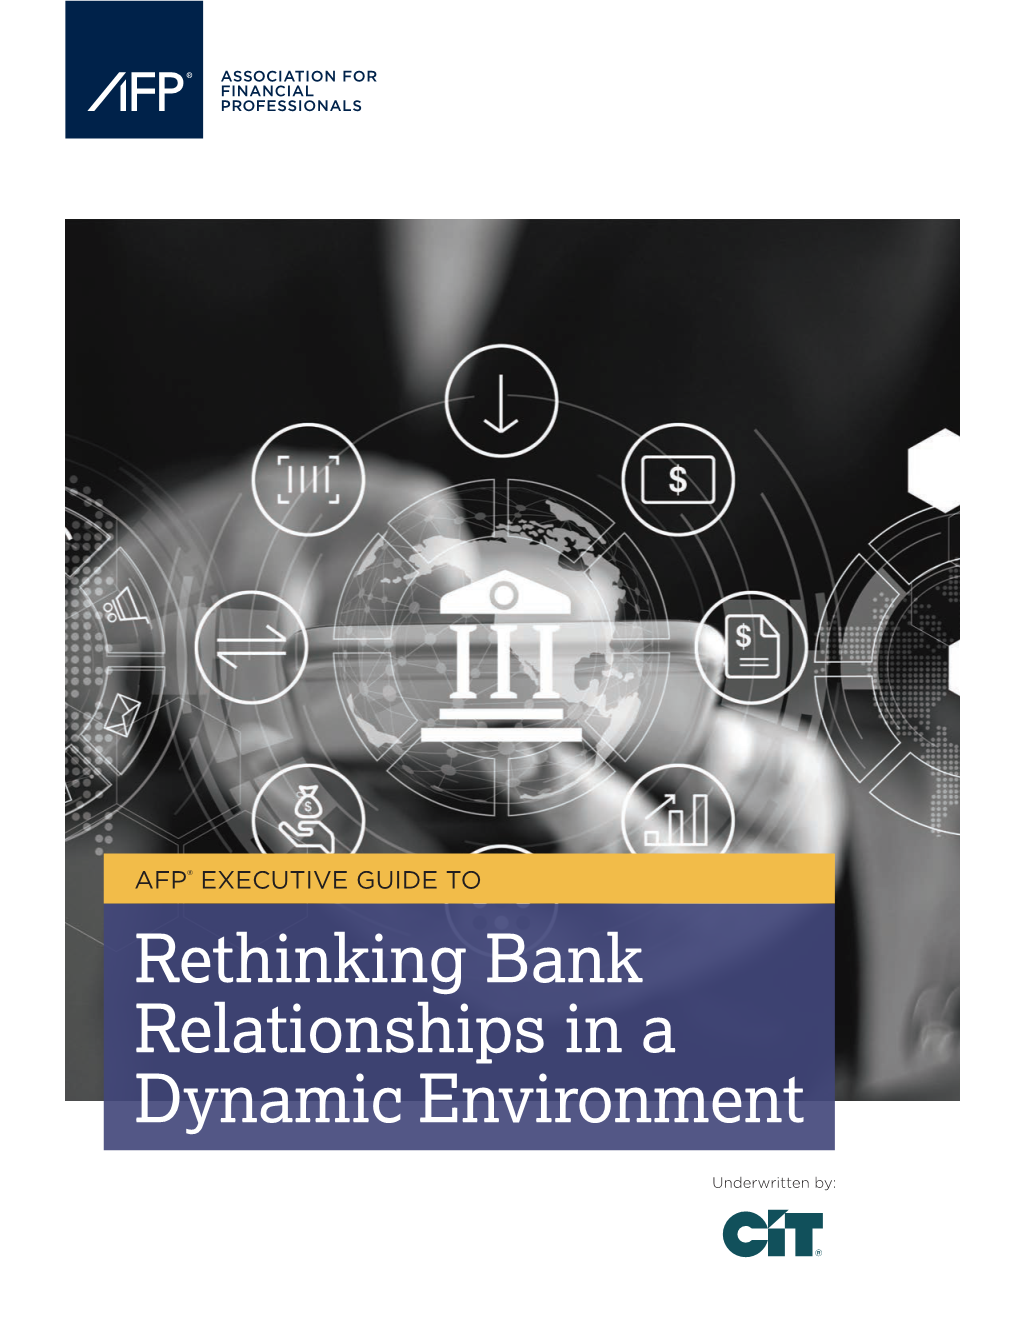 Rethinking Bank Relationships in a Dynamic Environment